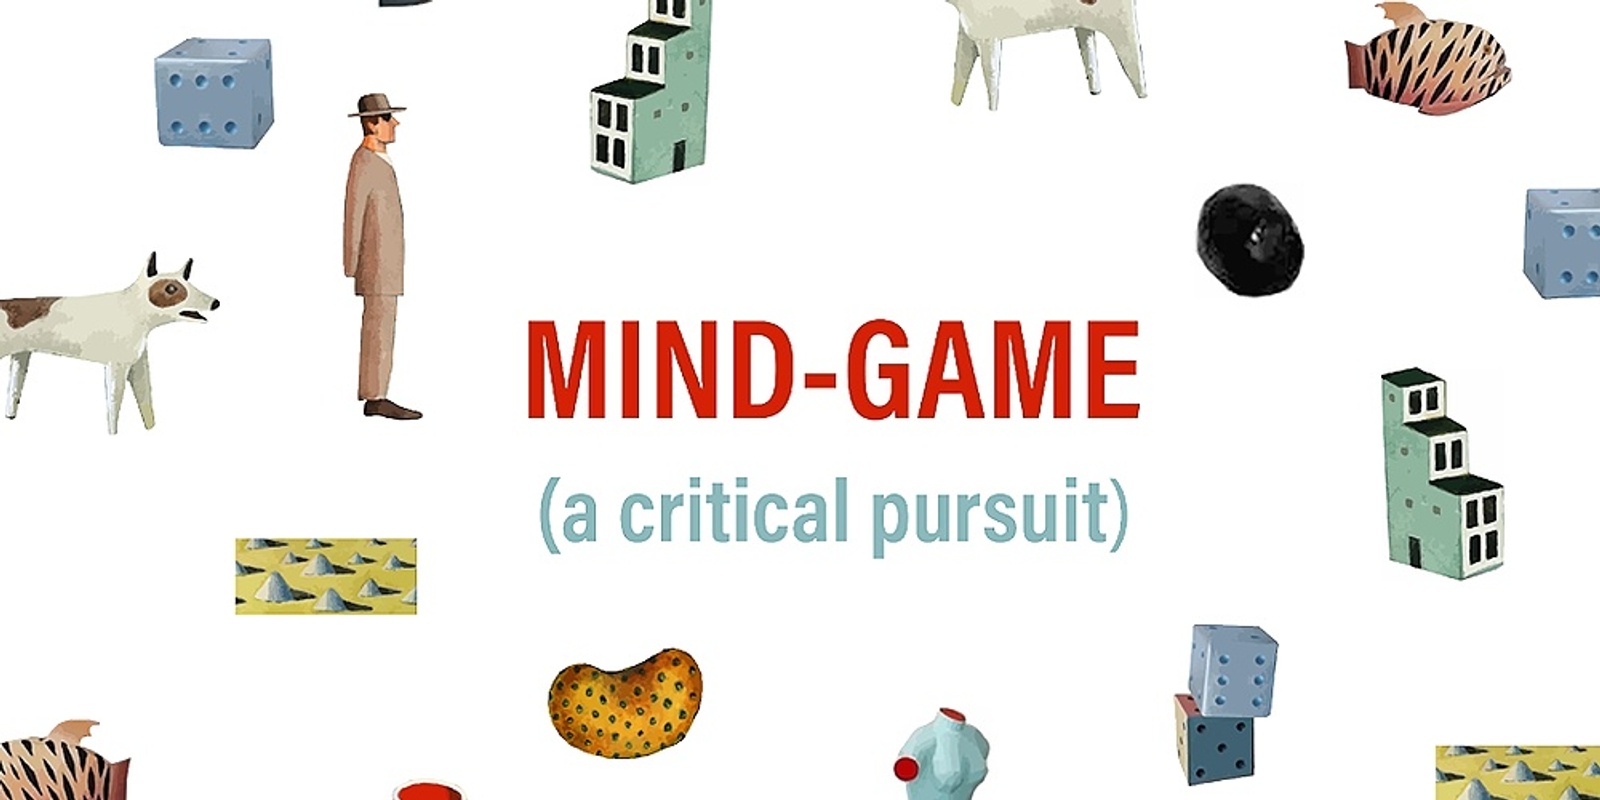 Banner image for The Night School #4: MIND-GAME/Critical Pursuit